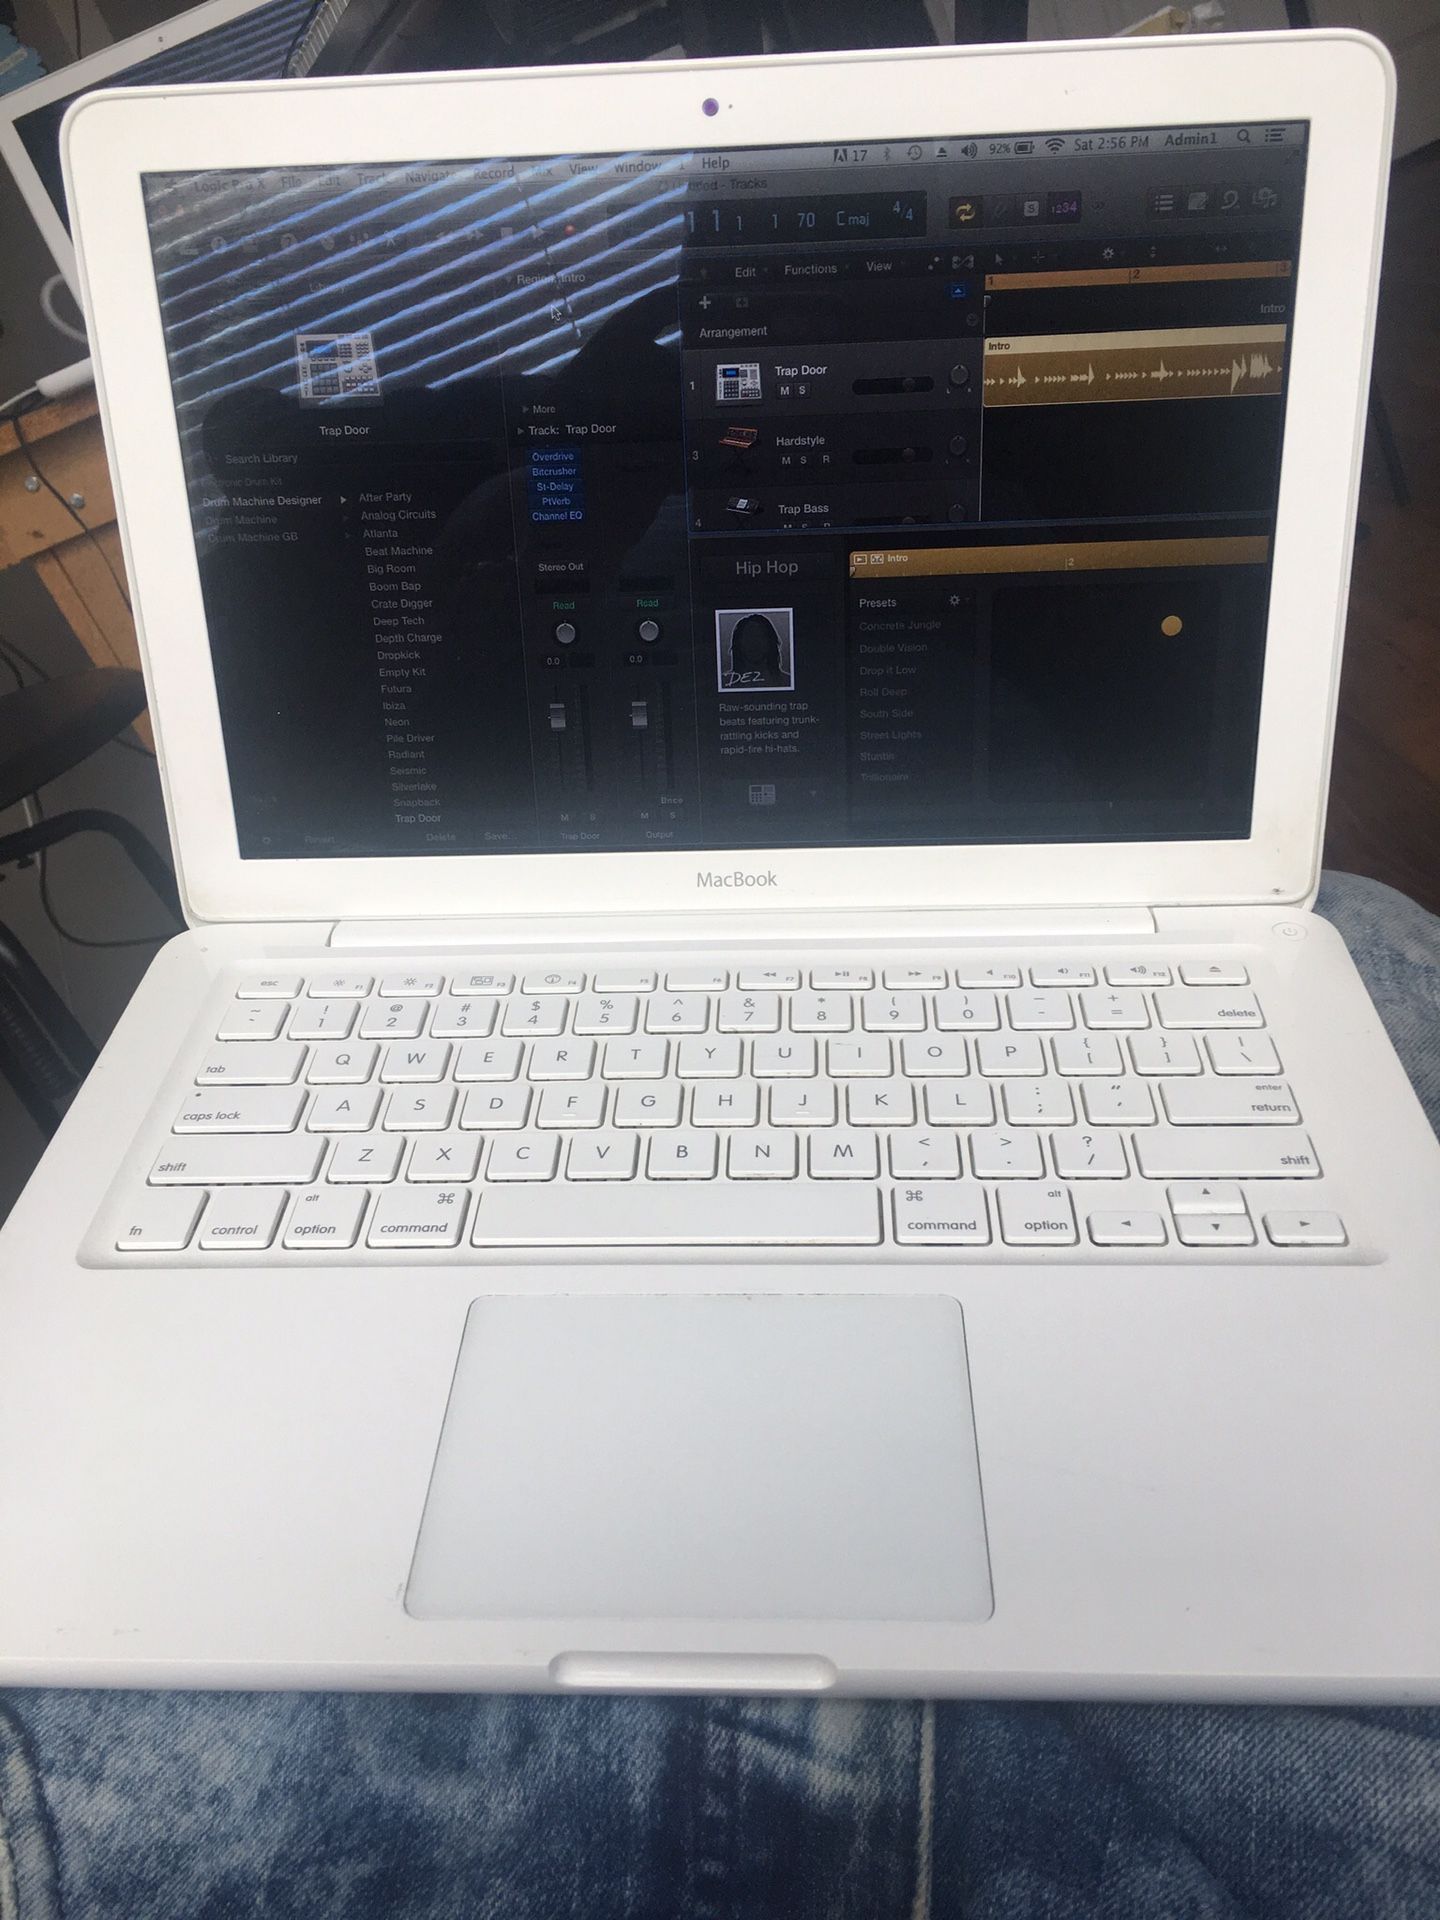 2010 MacBooks filled with tons of recording and video editing software $200